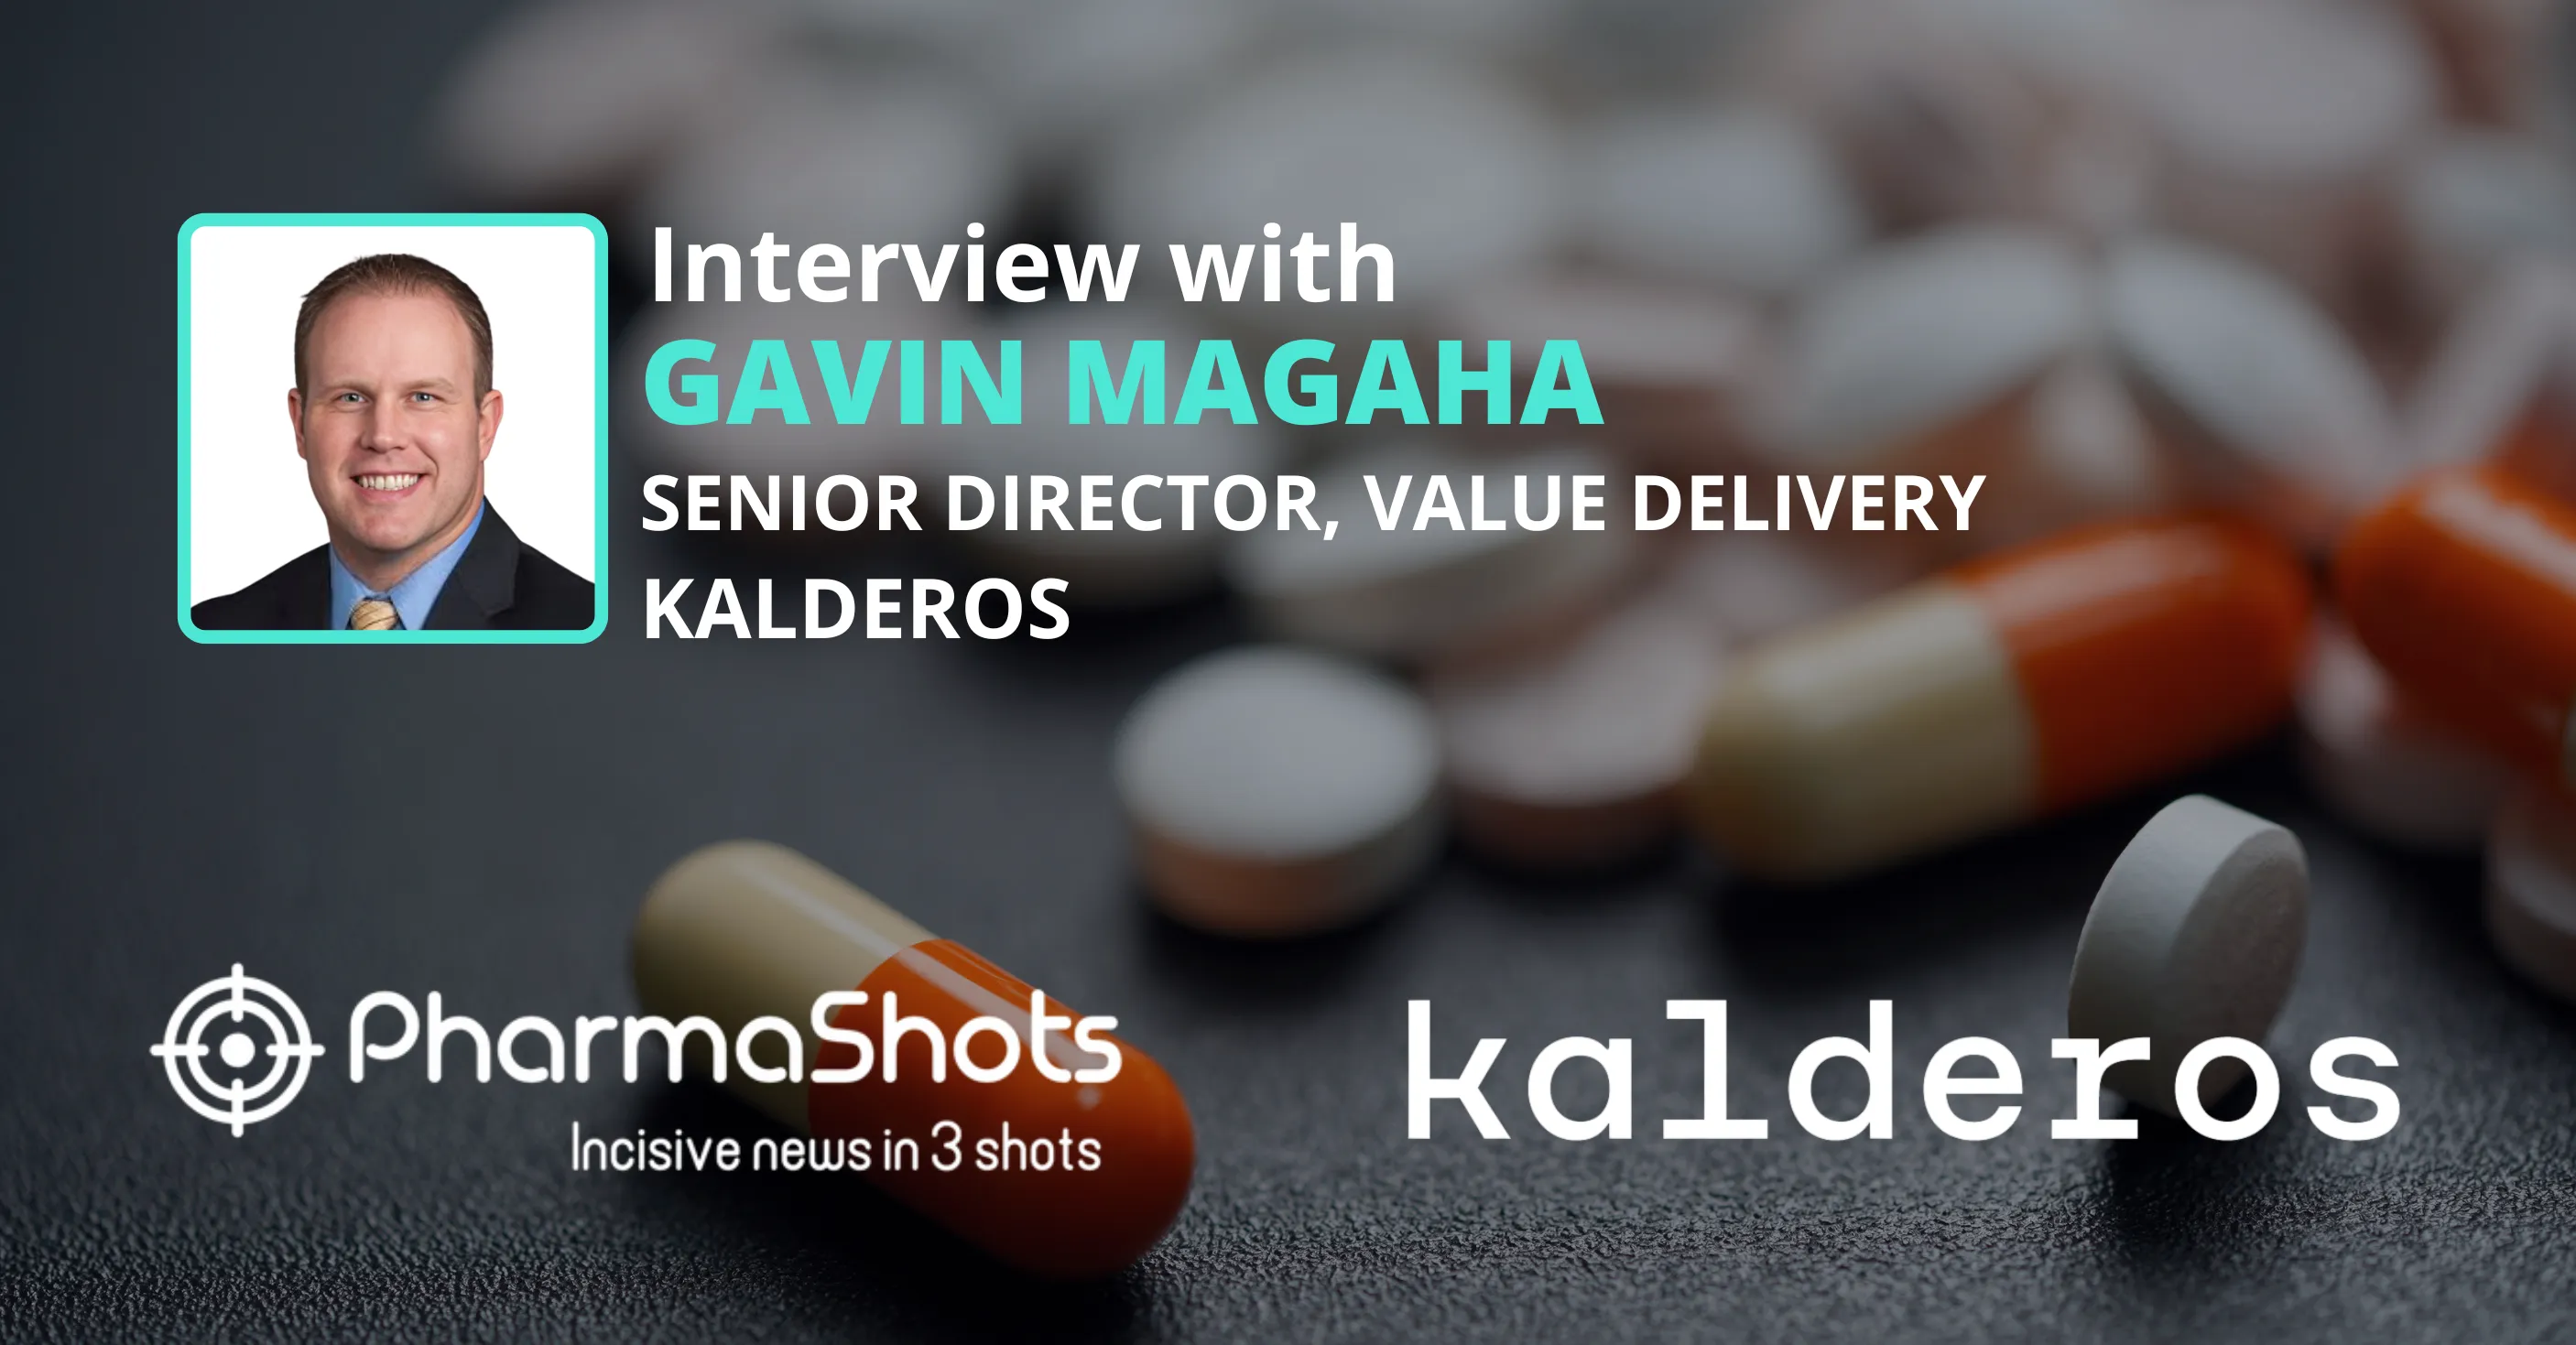 Drug Discount Solutions: Gavin Magaha from Kalderos, in a Stimulating Conversation with PharmaShots